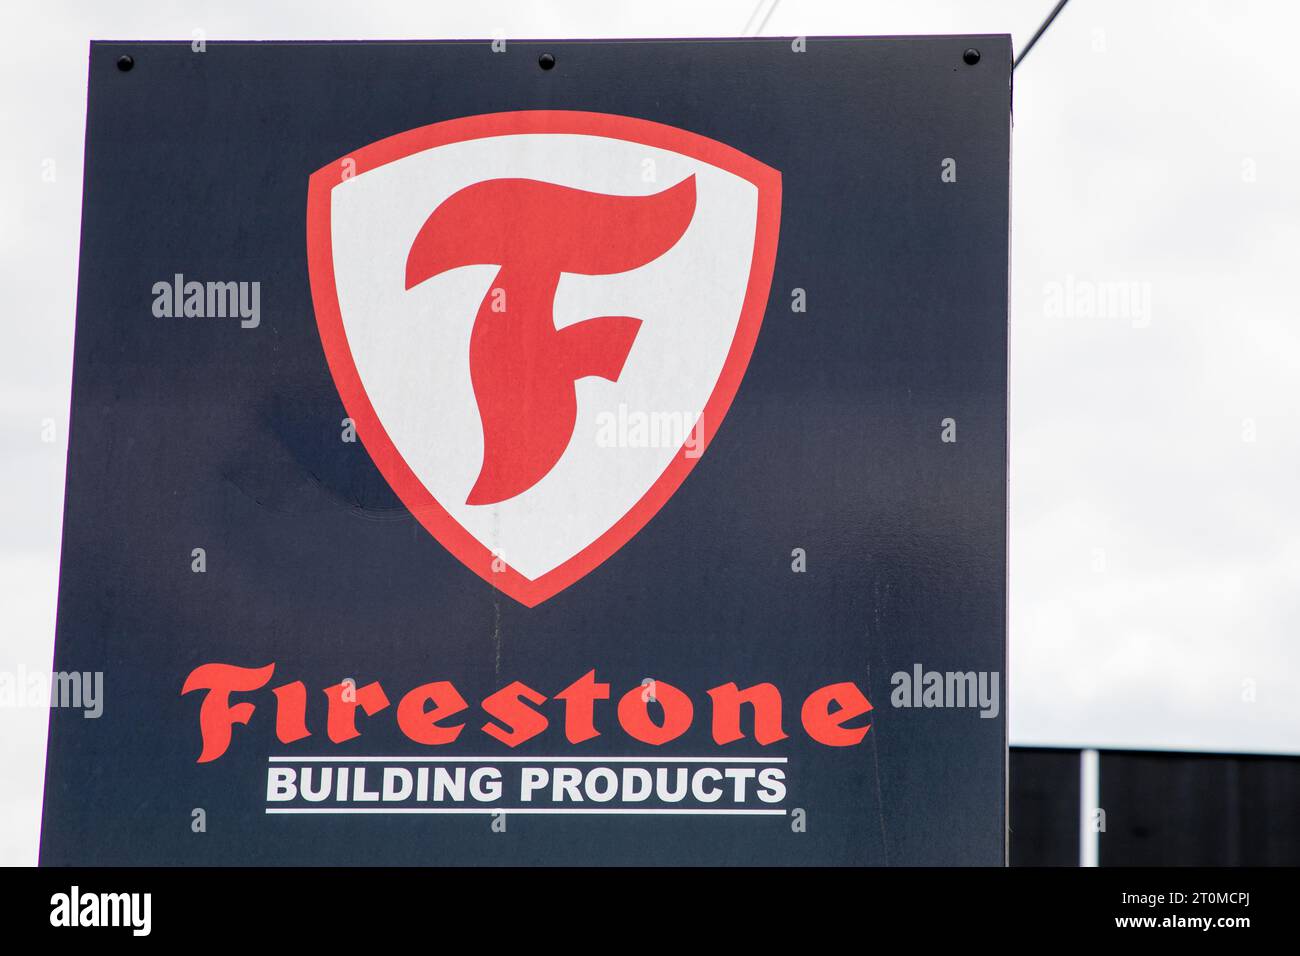 Bordeaux , France - 10 01 2023 : Firestone building products Tire and Rubber Company text brand and logo sign American industry Stock Photo